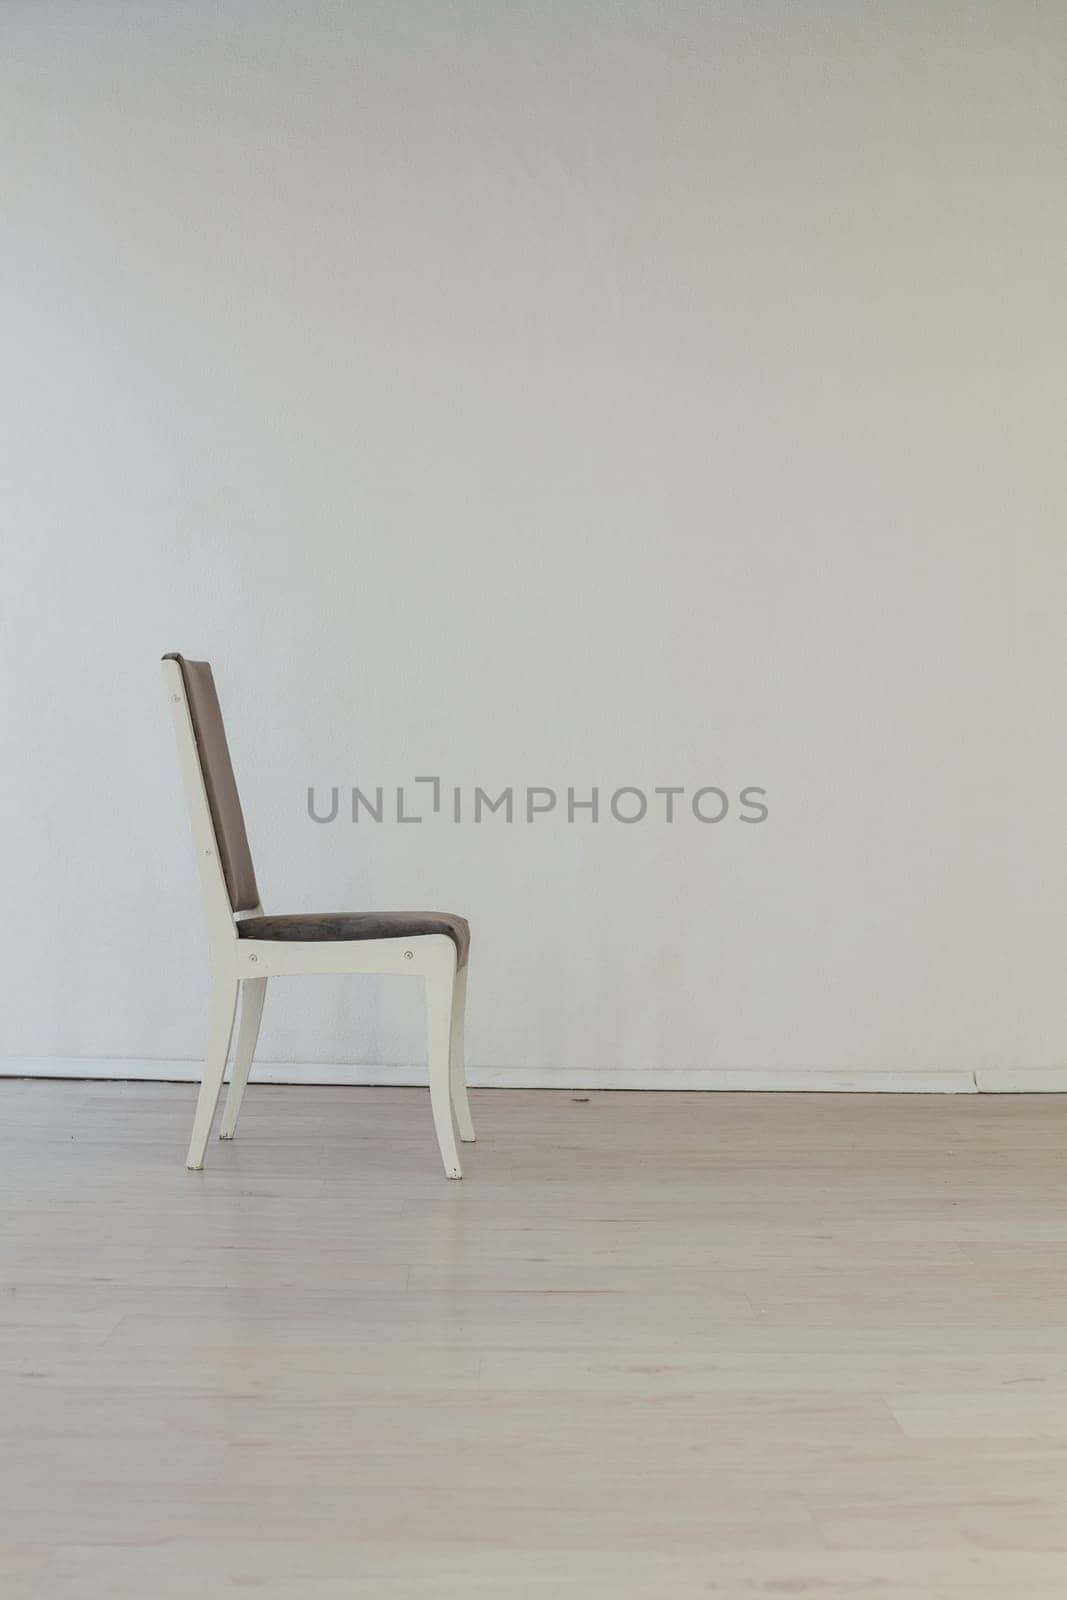 grey vintage chair in the interior of an empty room